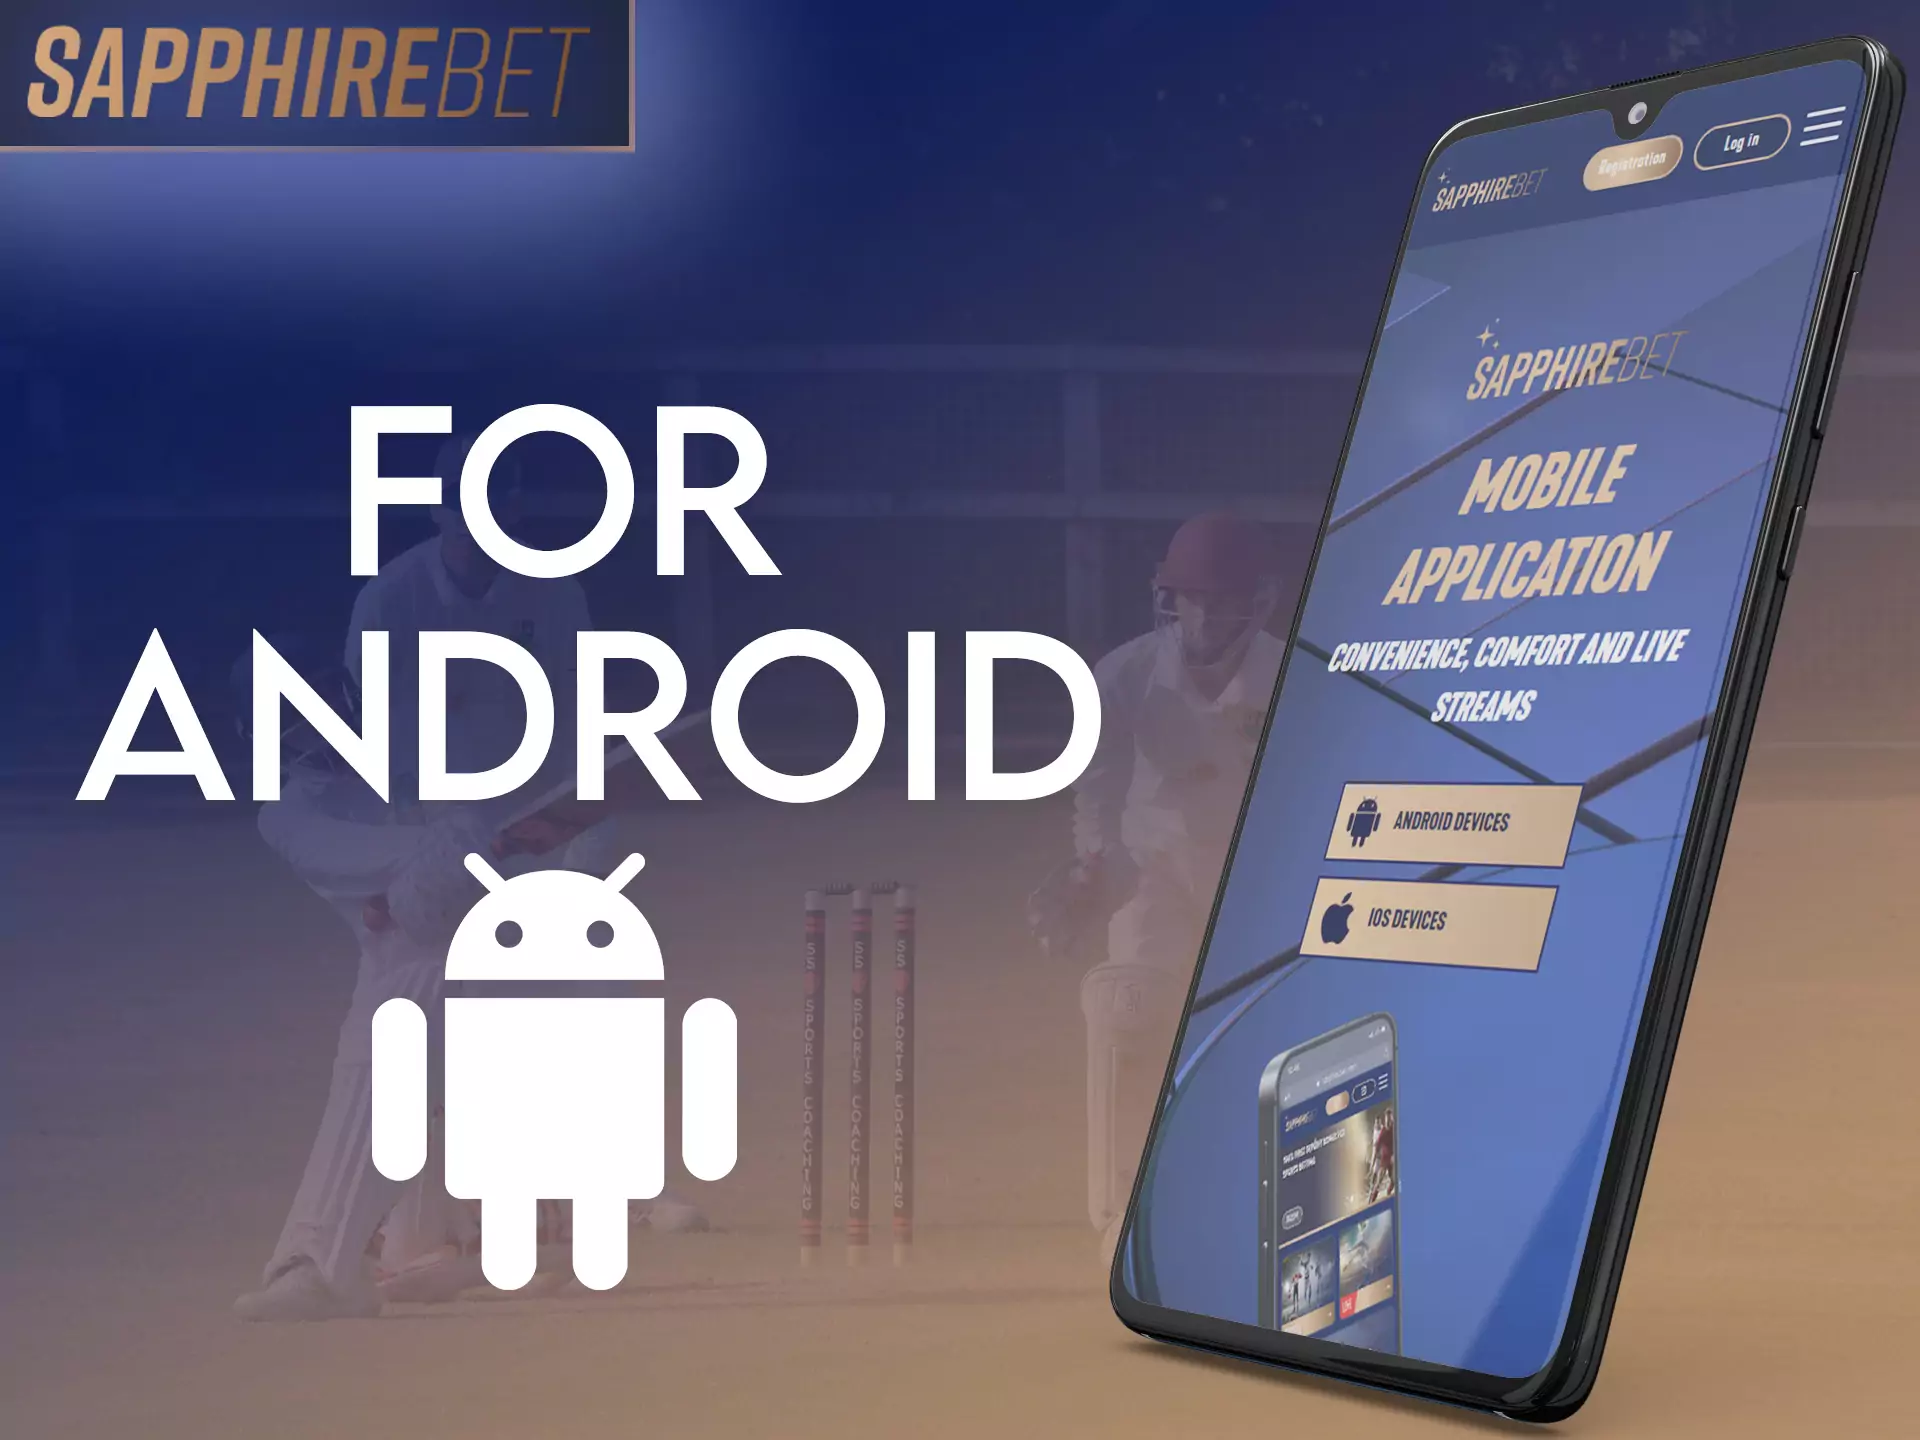 The Sapphirebet application is supported on various Android mobile devices.